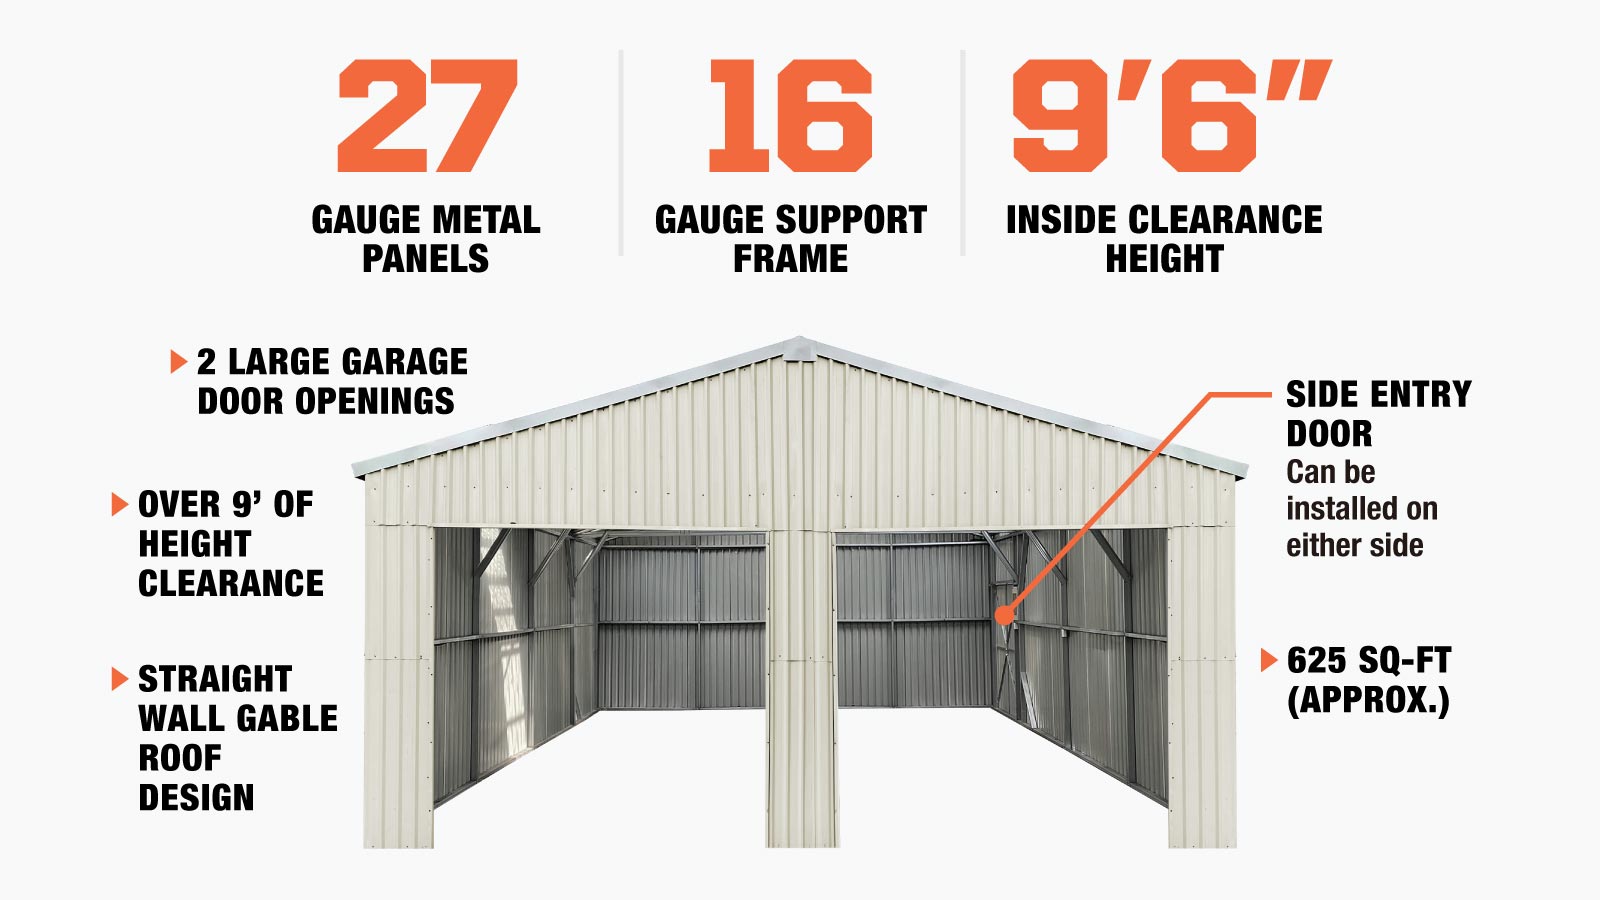 TMG Industrial 25’ x 25’ Double Garage Metal Barn Shed with Side Entry Door, 625 Sq-Ft Floor Space, 9’8” Eave Height, 27 GA Metal, Skylights, 4/12 Roof Pitch, TMG-MS2525-description-image